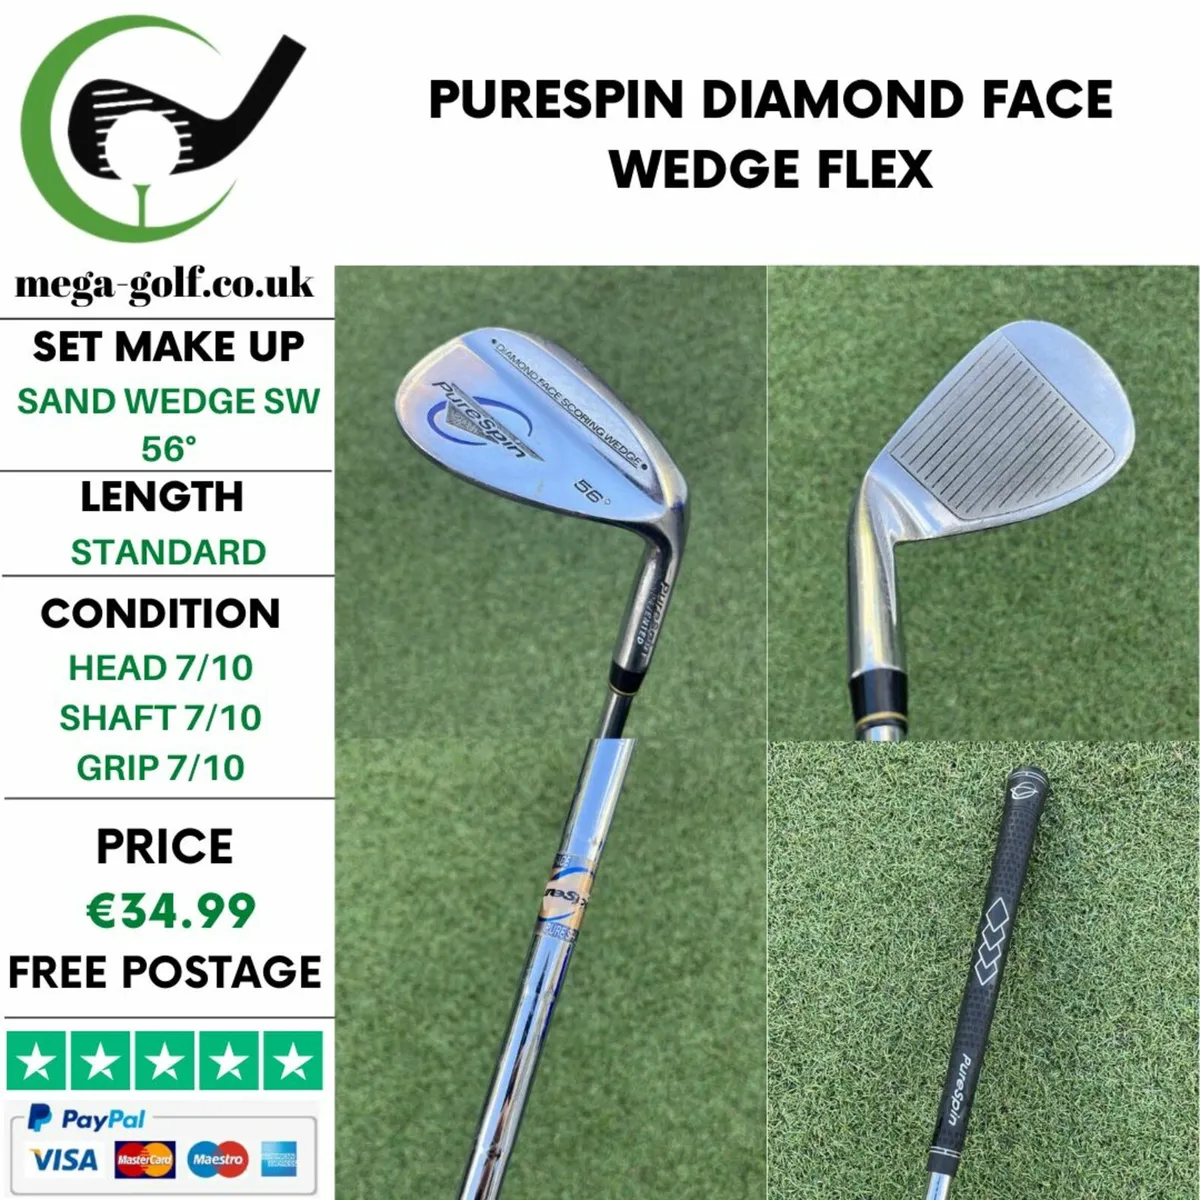 PURESPIN DIAMOND FACE SAND WEDGE SW 56° / WEDGE